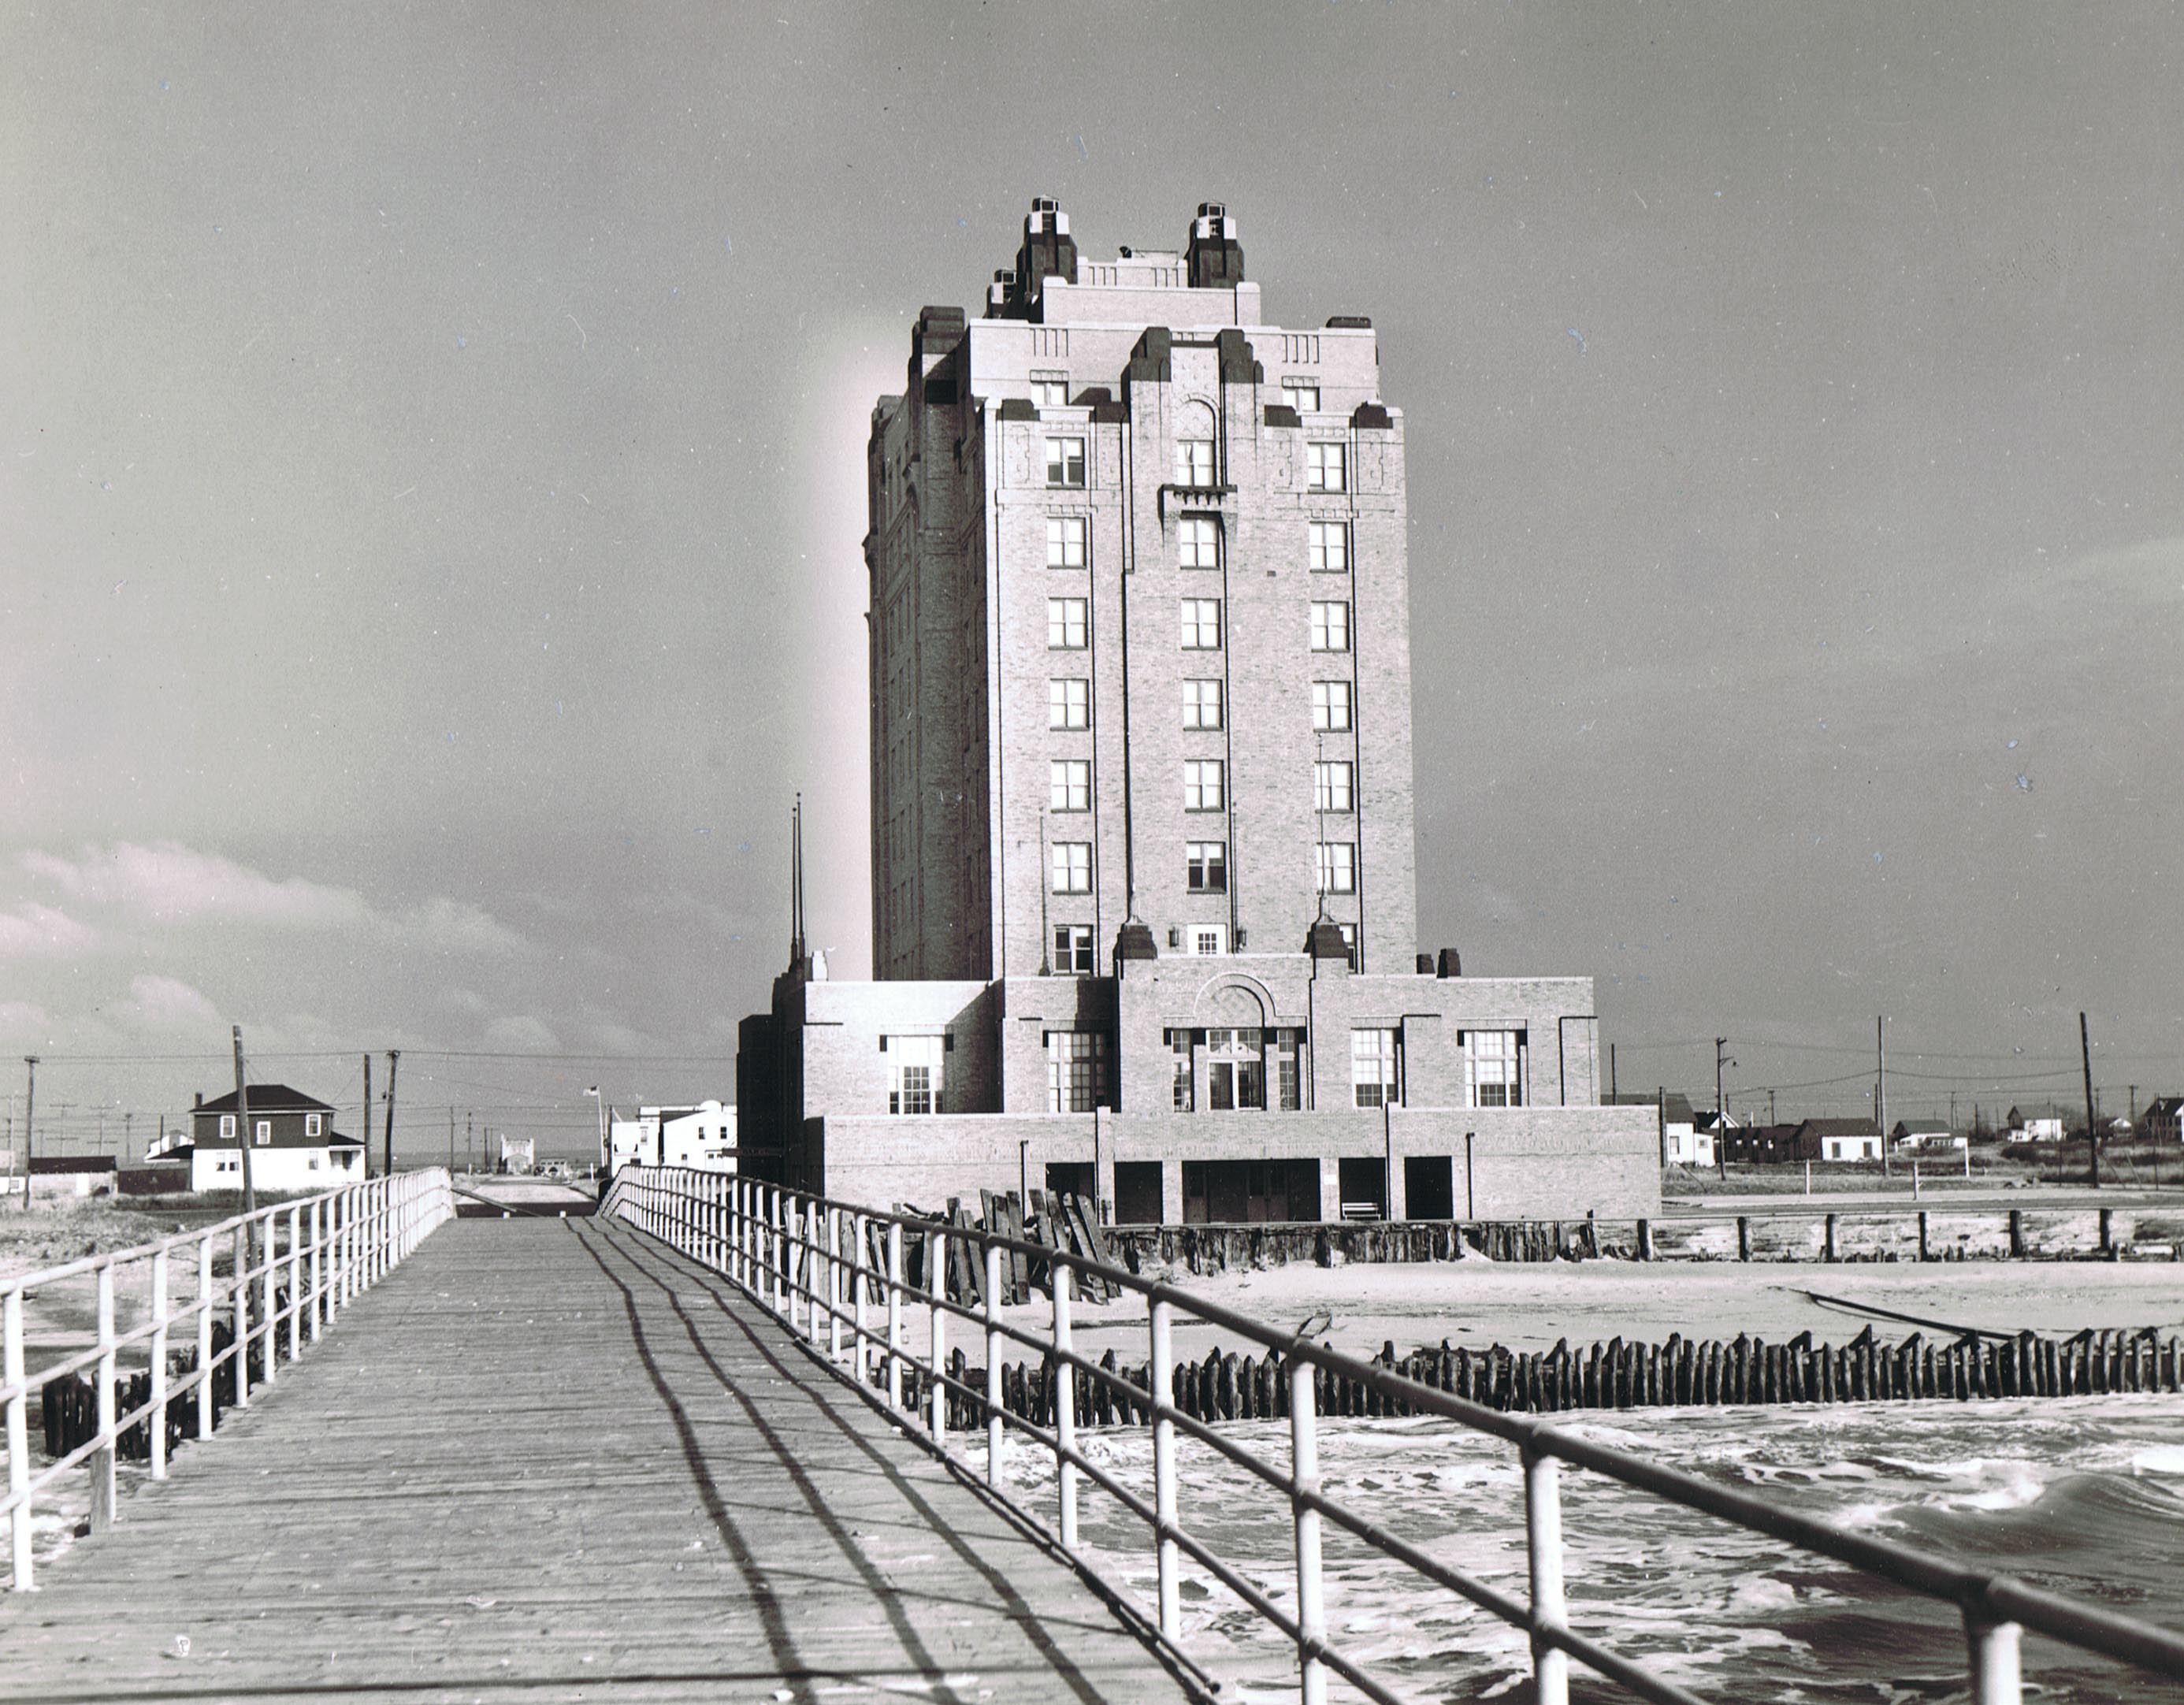 The Brigantine Hotel as seen from the pier